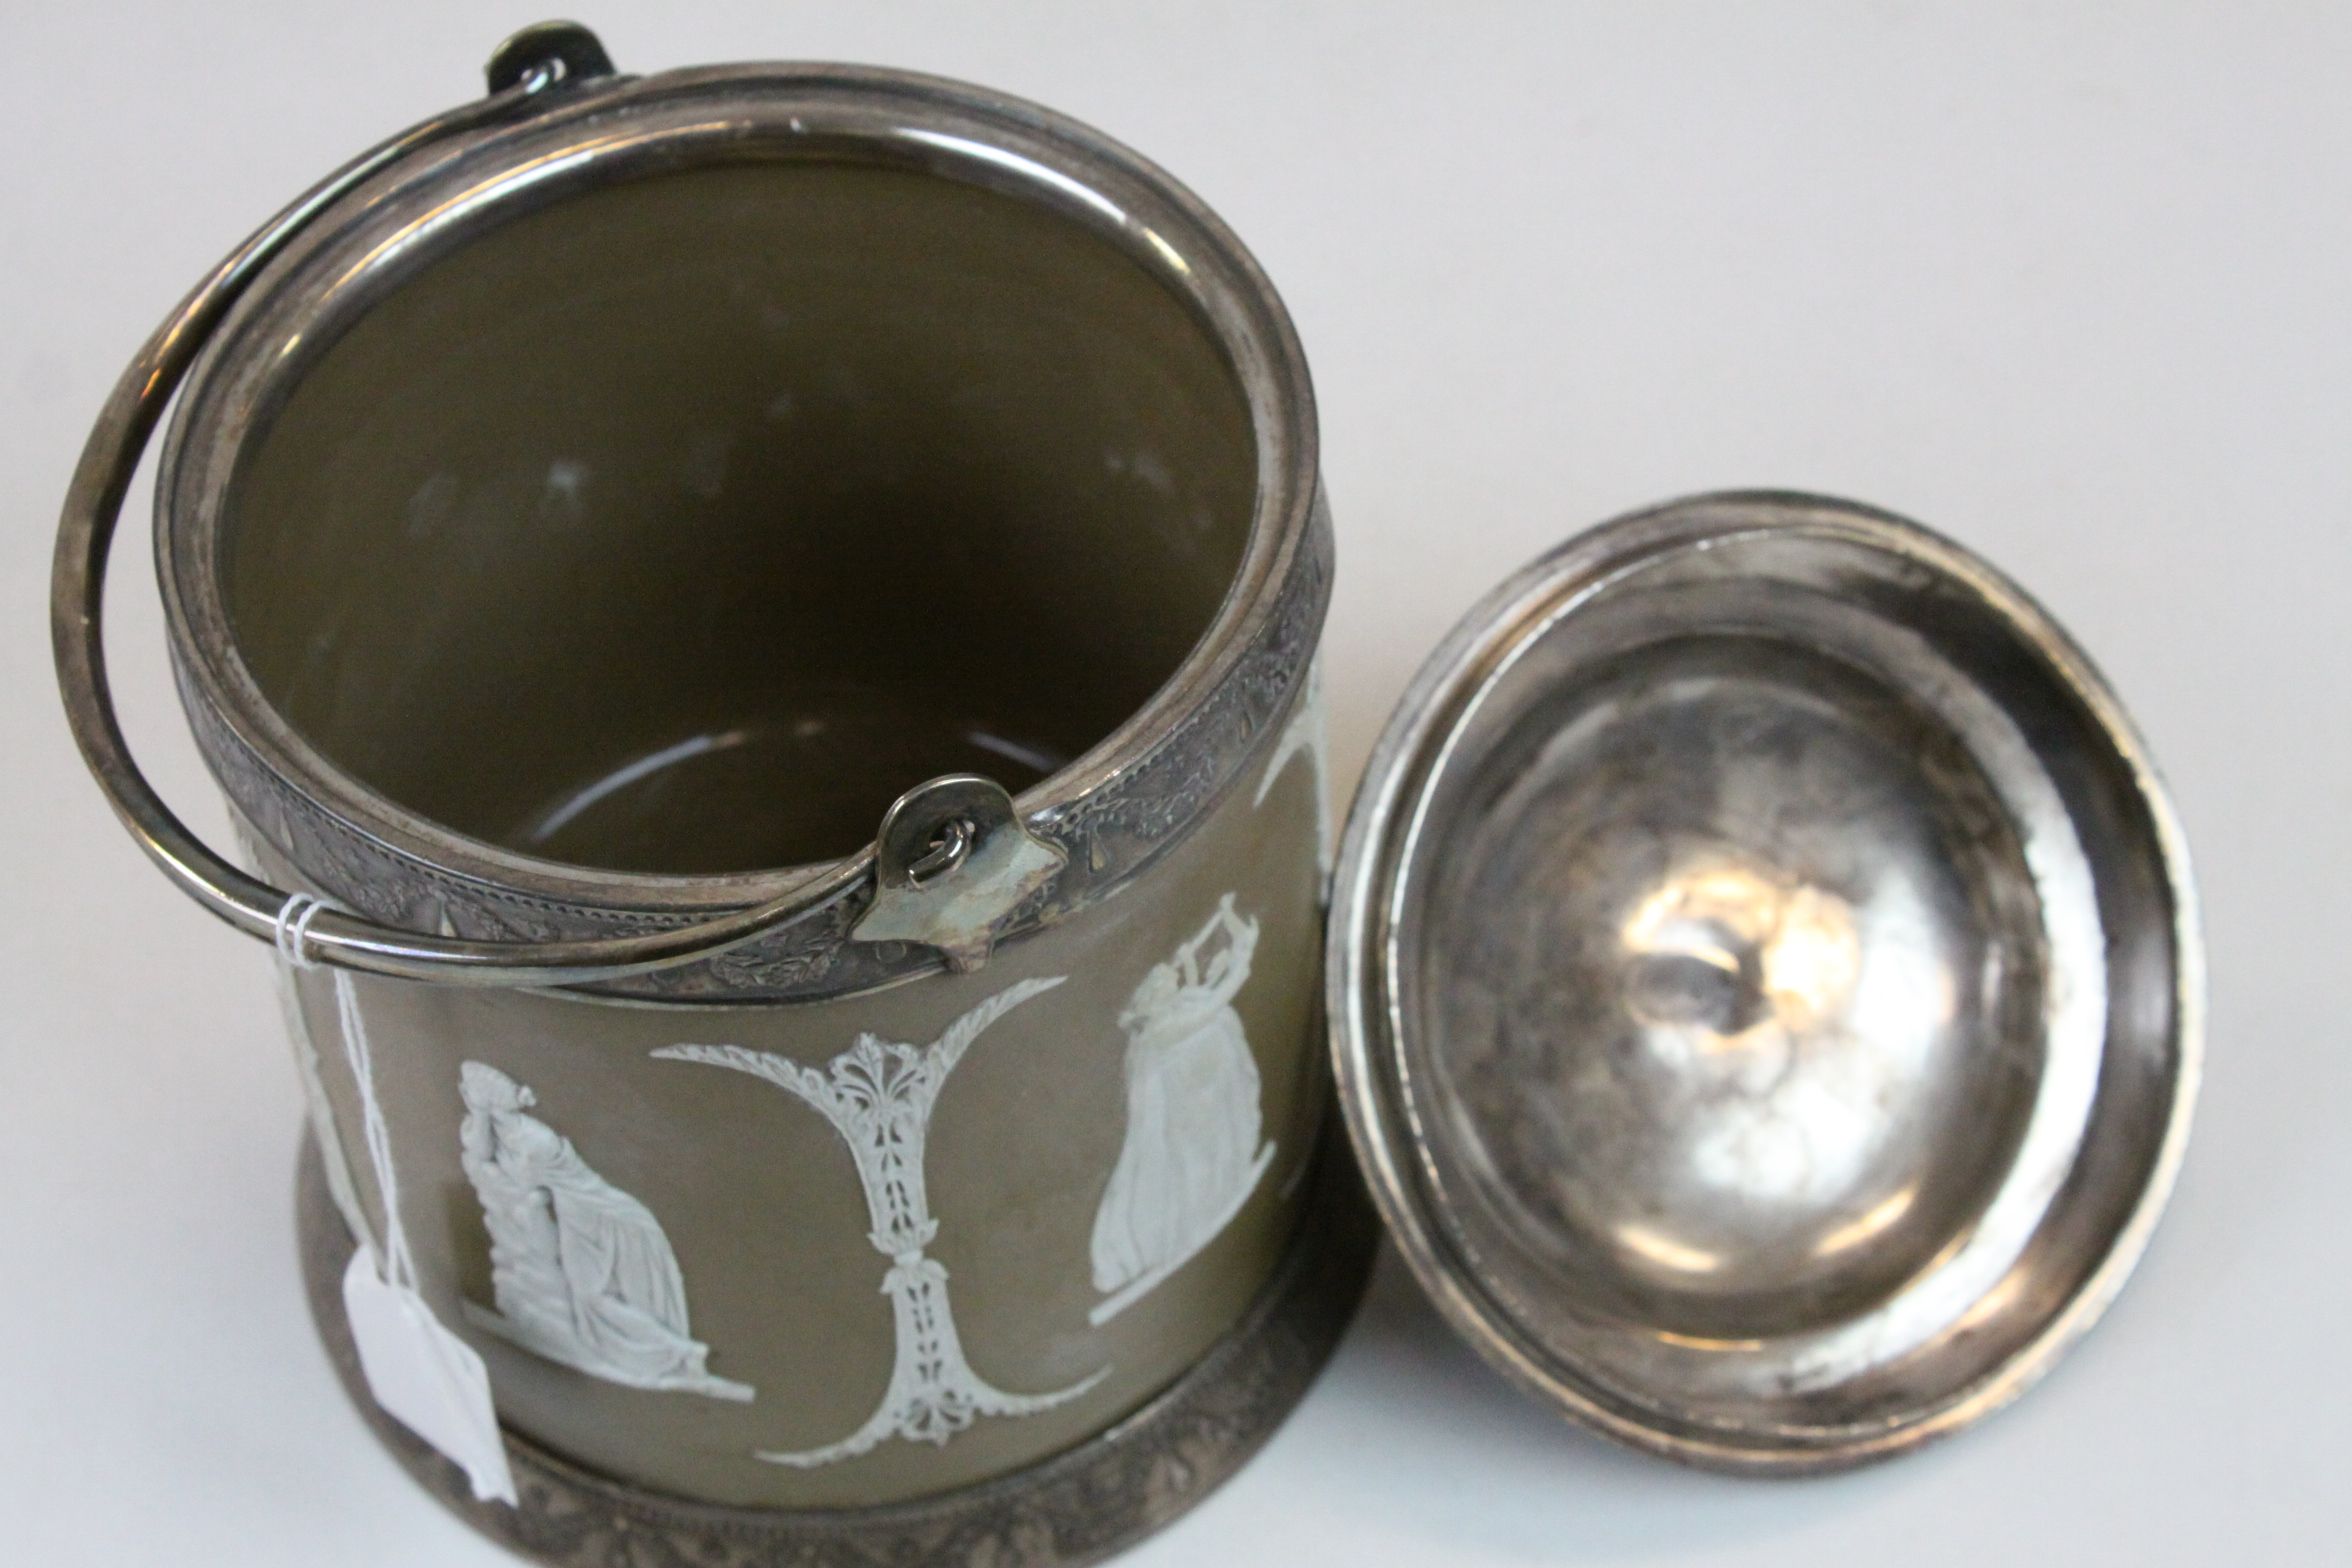 19th Century Jasper ware Biscuit Barrel with Silver plated mounts, lid and swing handle, stands - Image 6 of 6